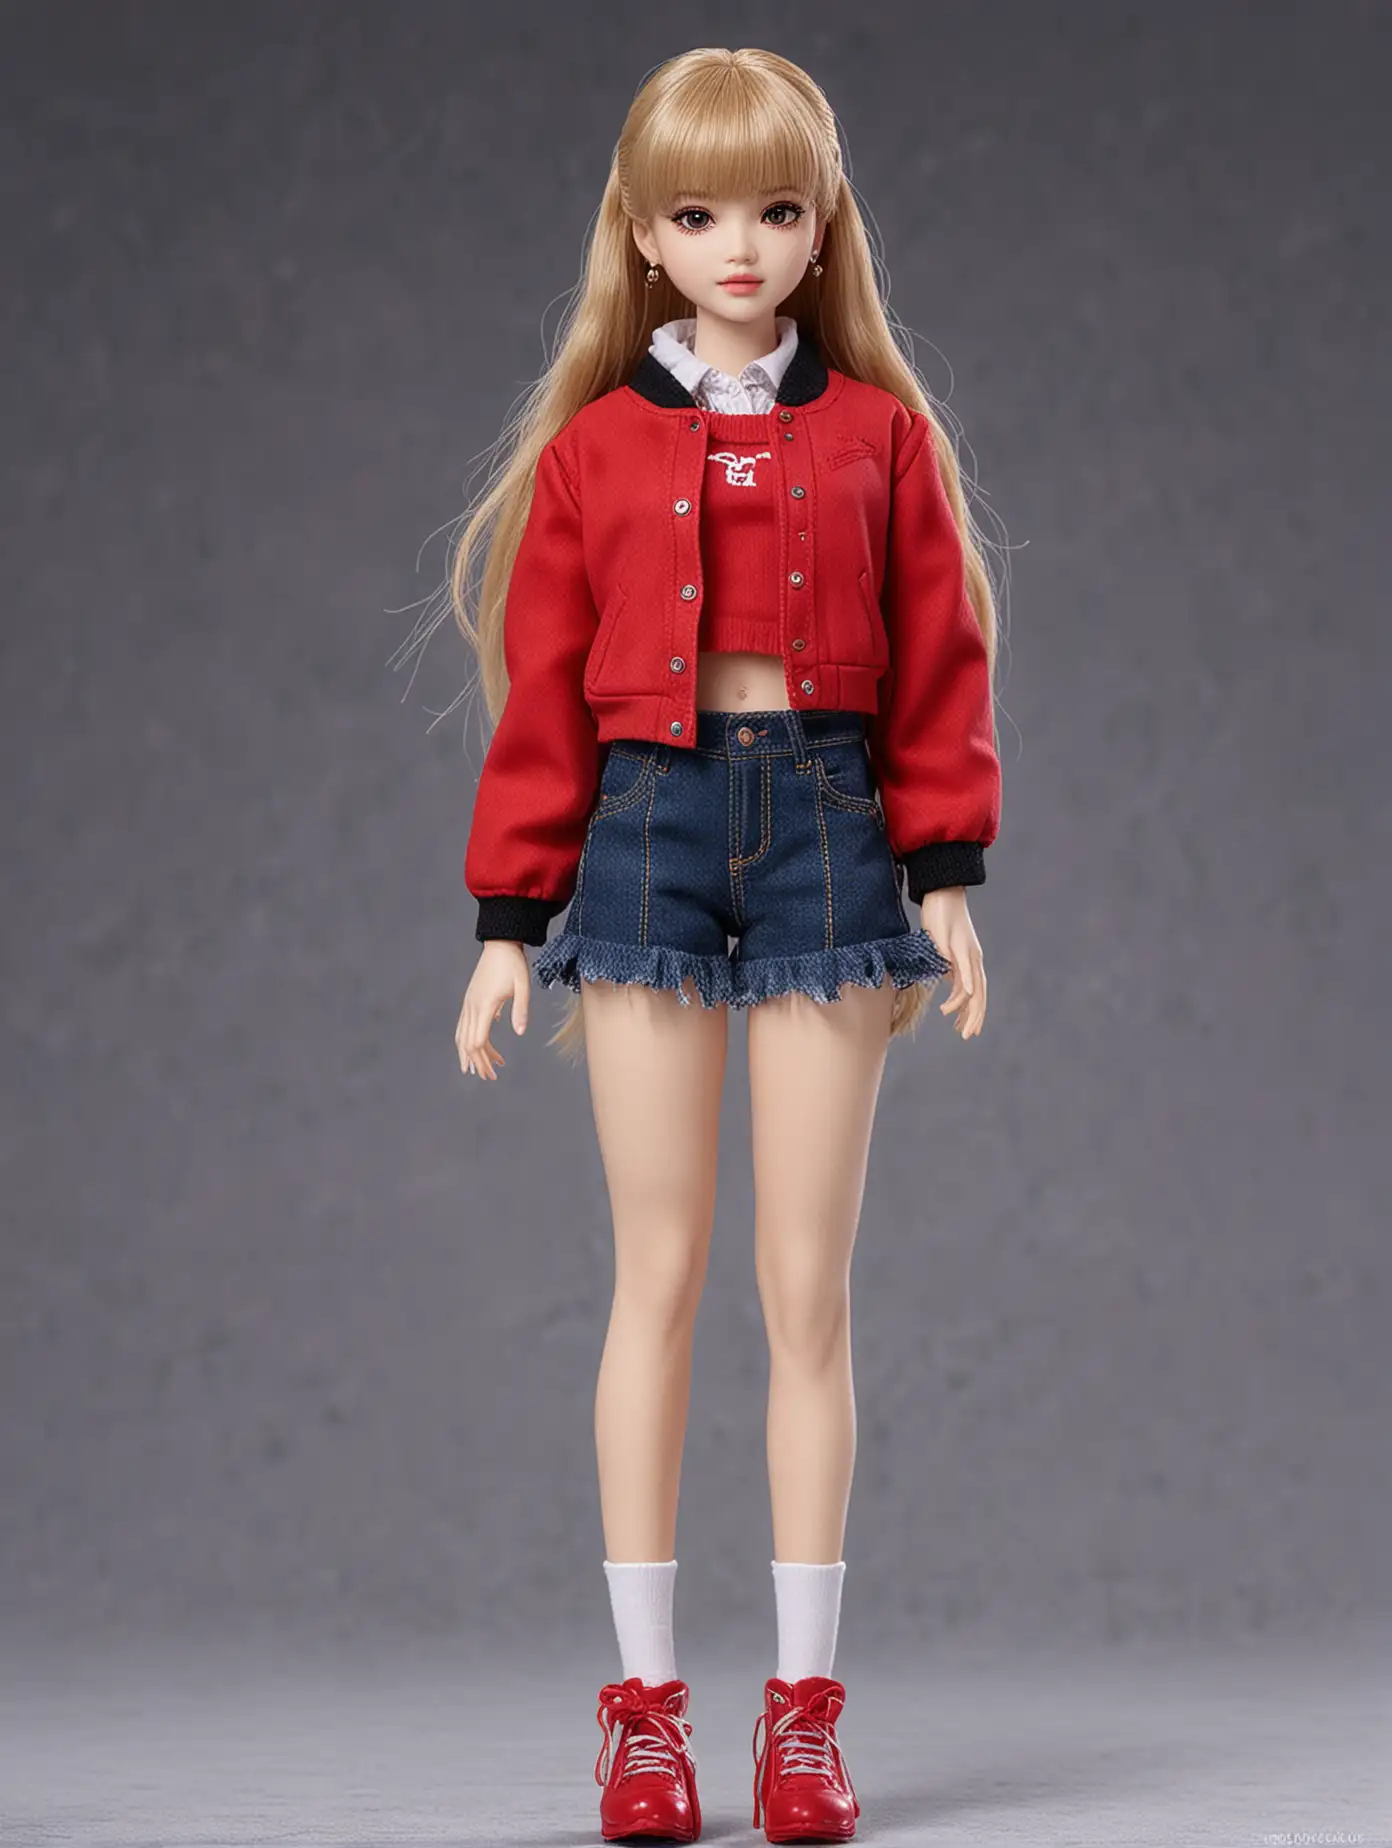 Blackpink Lisa Beautiful Doll in Red Jacket and Shoes